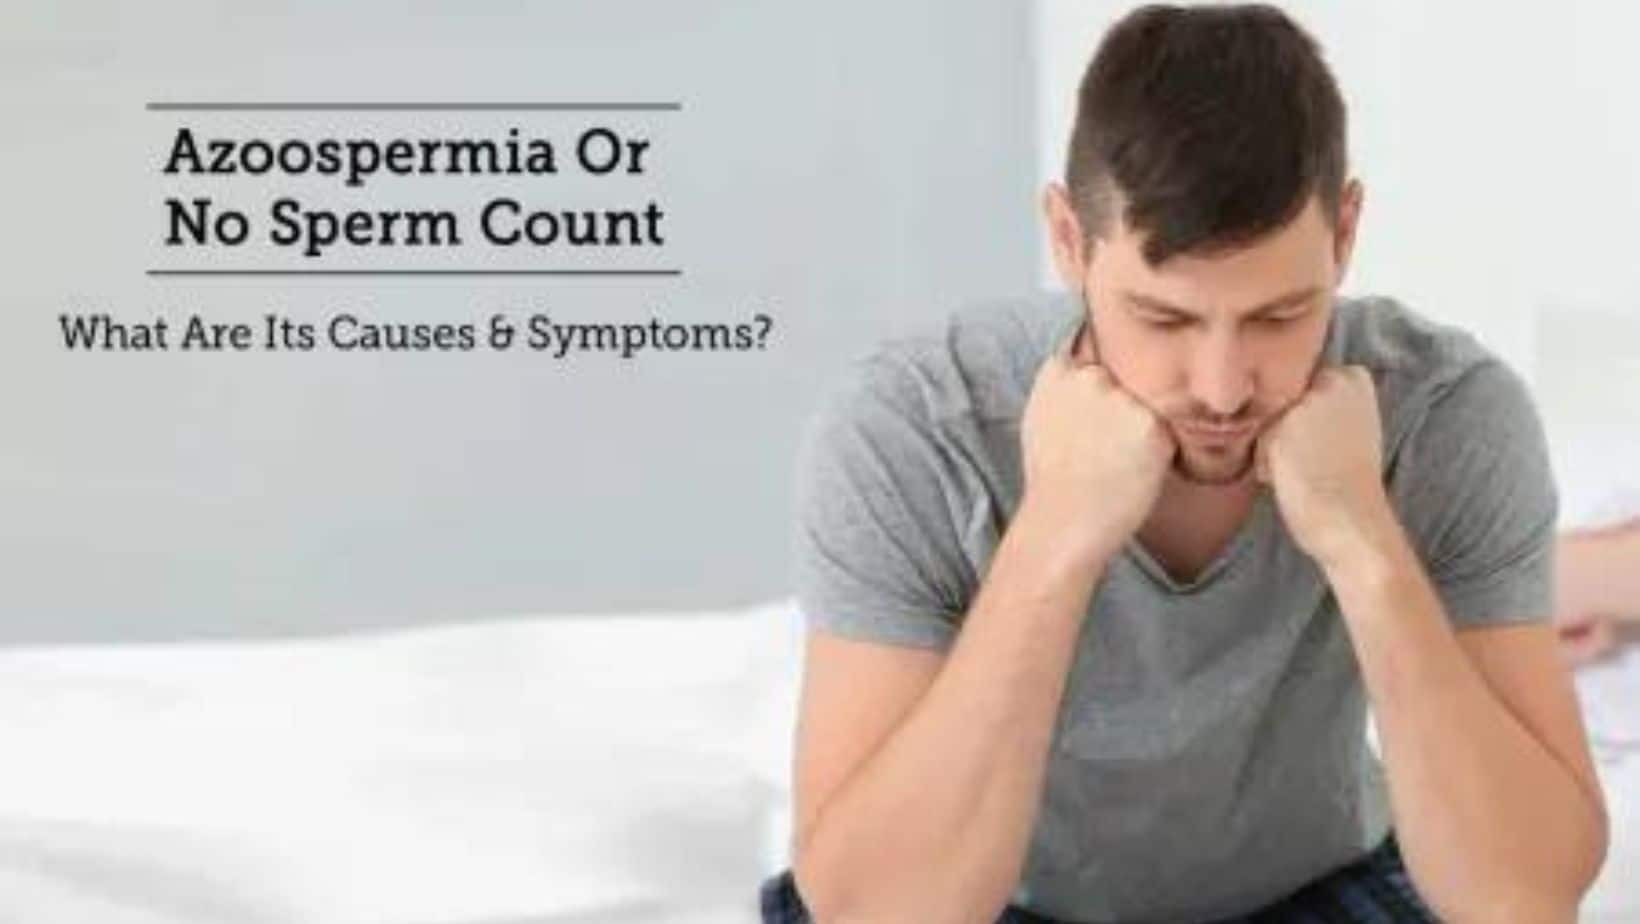 Azoospermia (No Sperm Count In Semen): Swelling In Testicles And Other Warning Symptoms To Look Out For